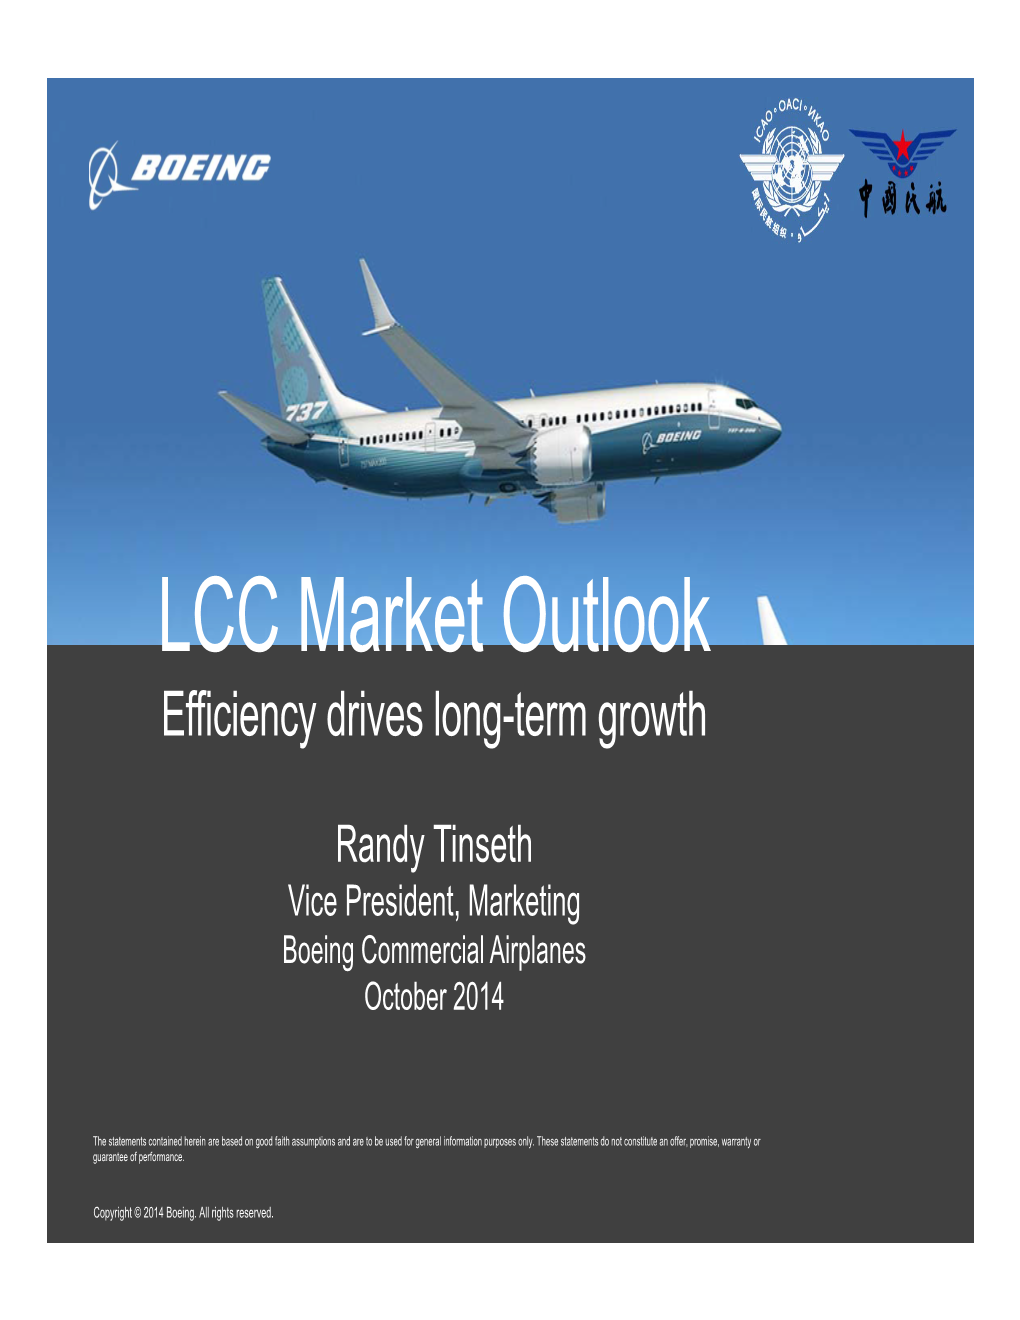 LCC Market Outlook Efficiency Drives Long-Term Growth